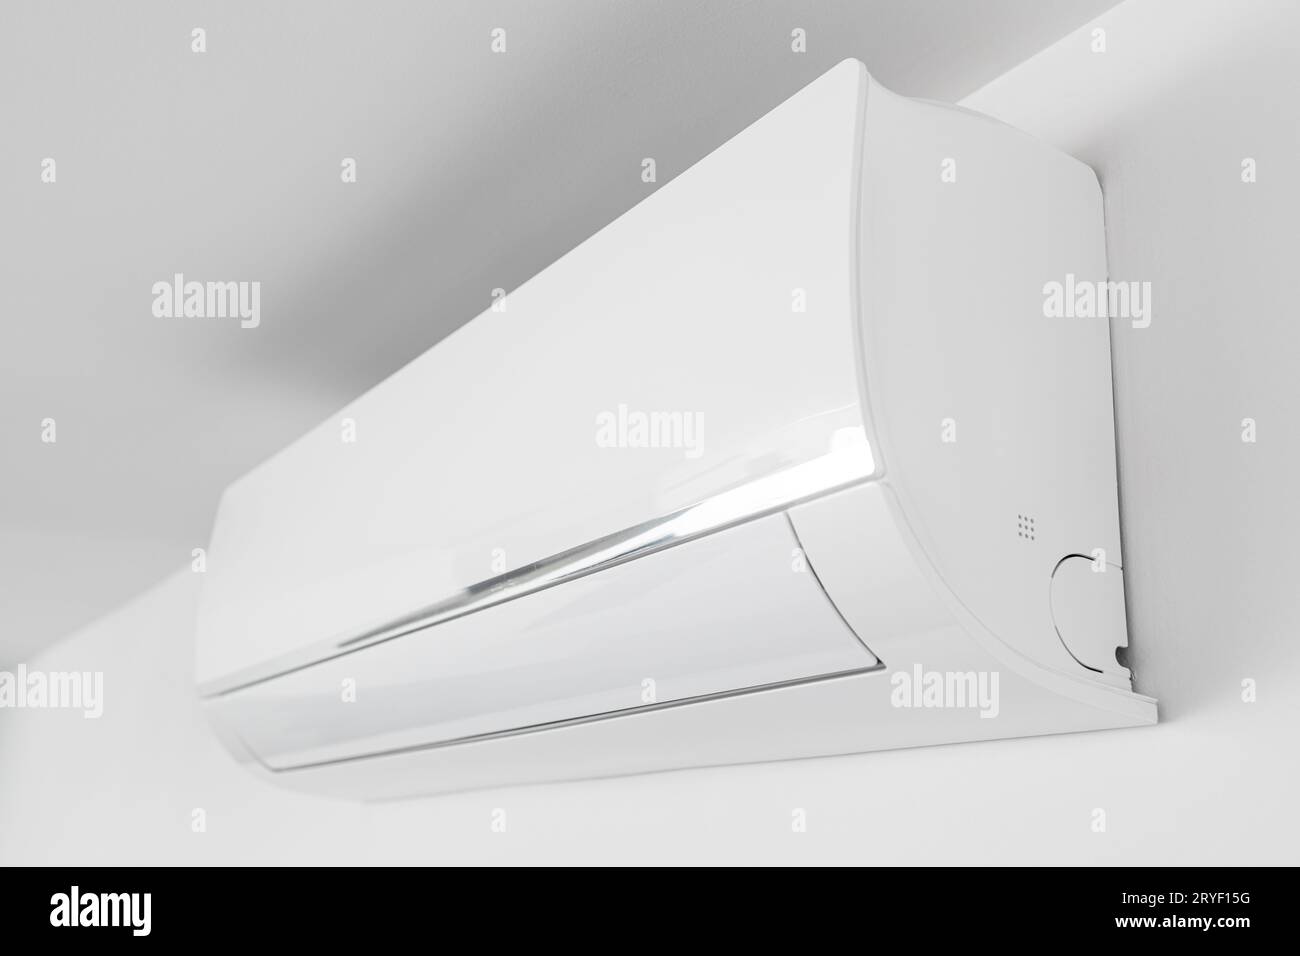 Indoor Air conditioner unit mounted on wall used for cooling space Stock Photo